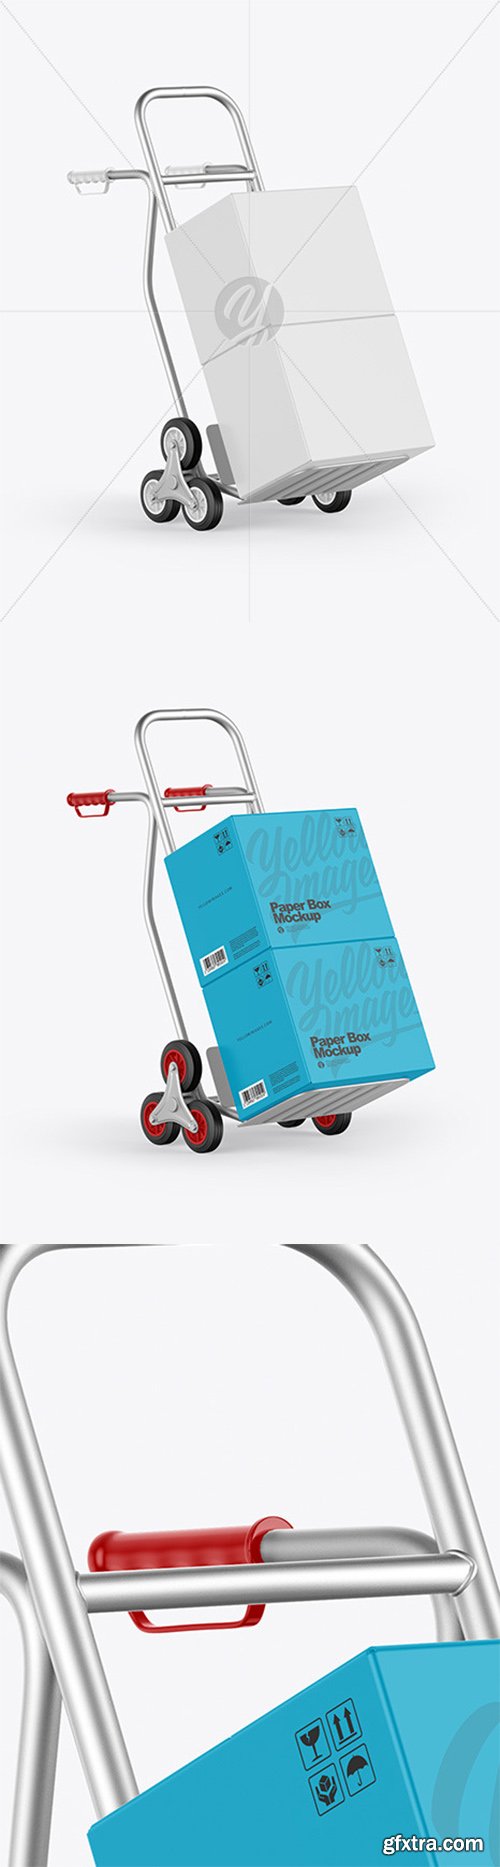 Metallic Hand Truck With Boxes Mockup 58405